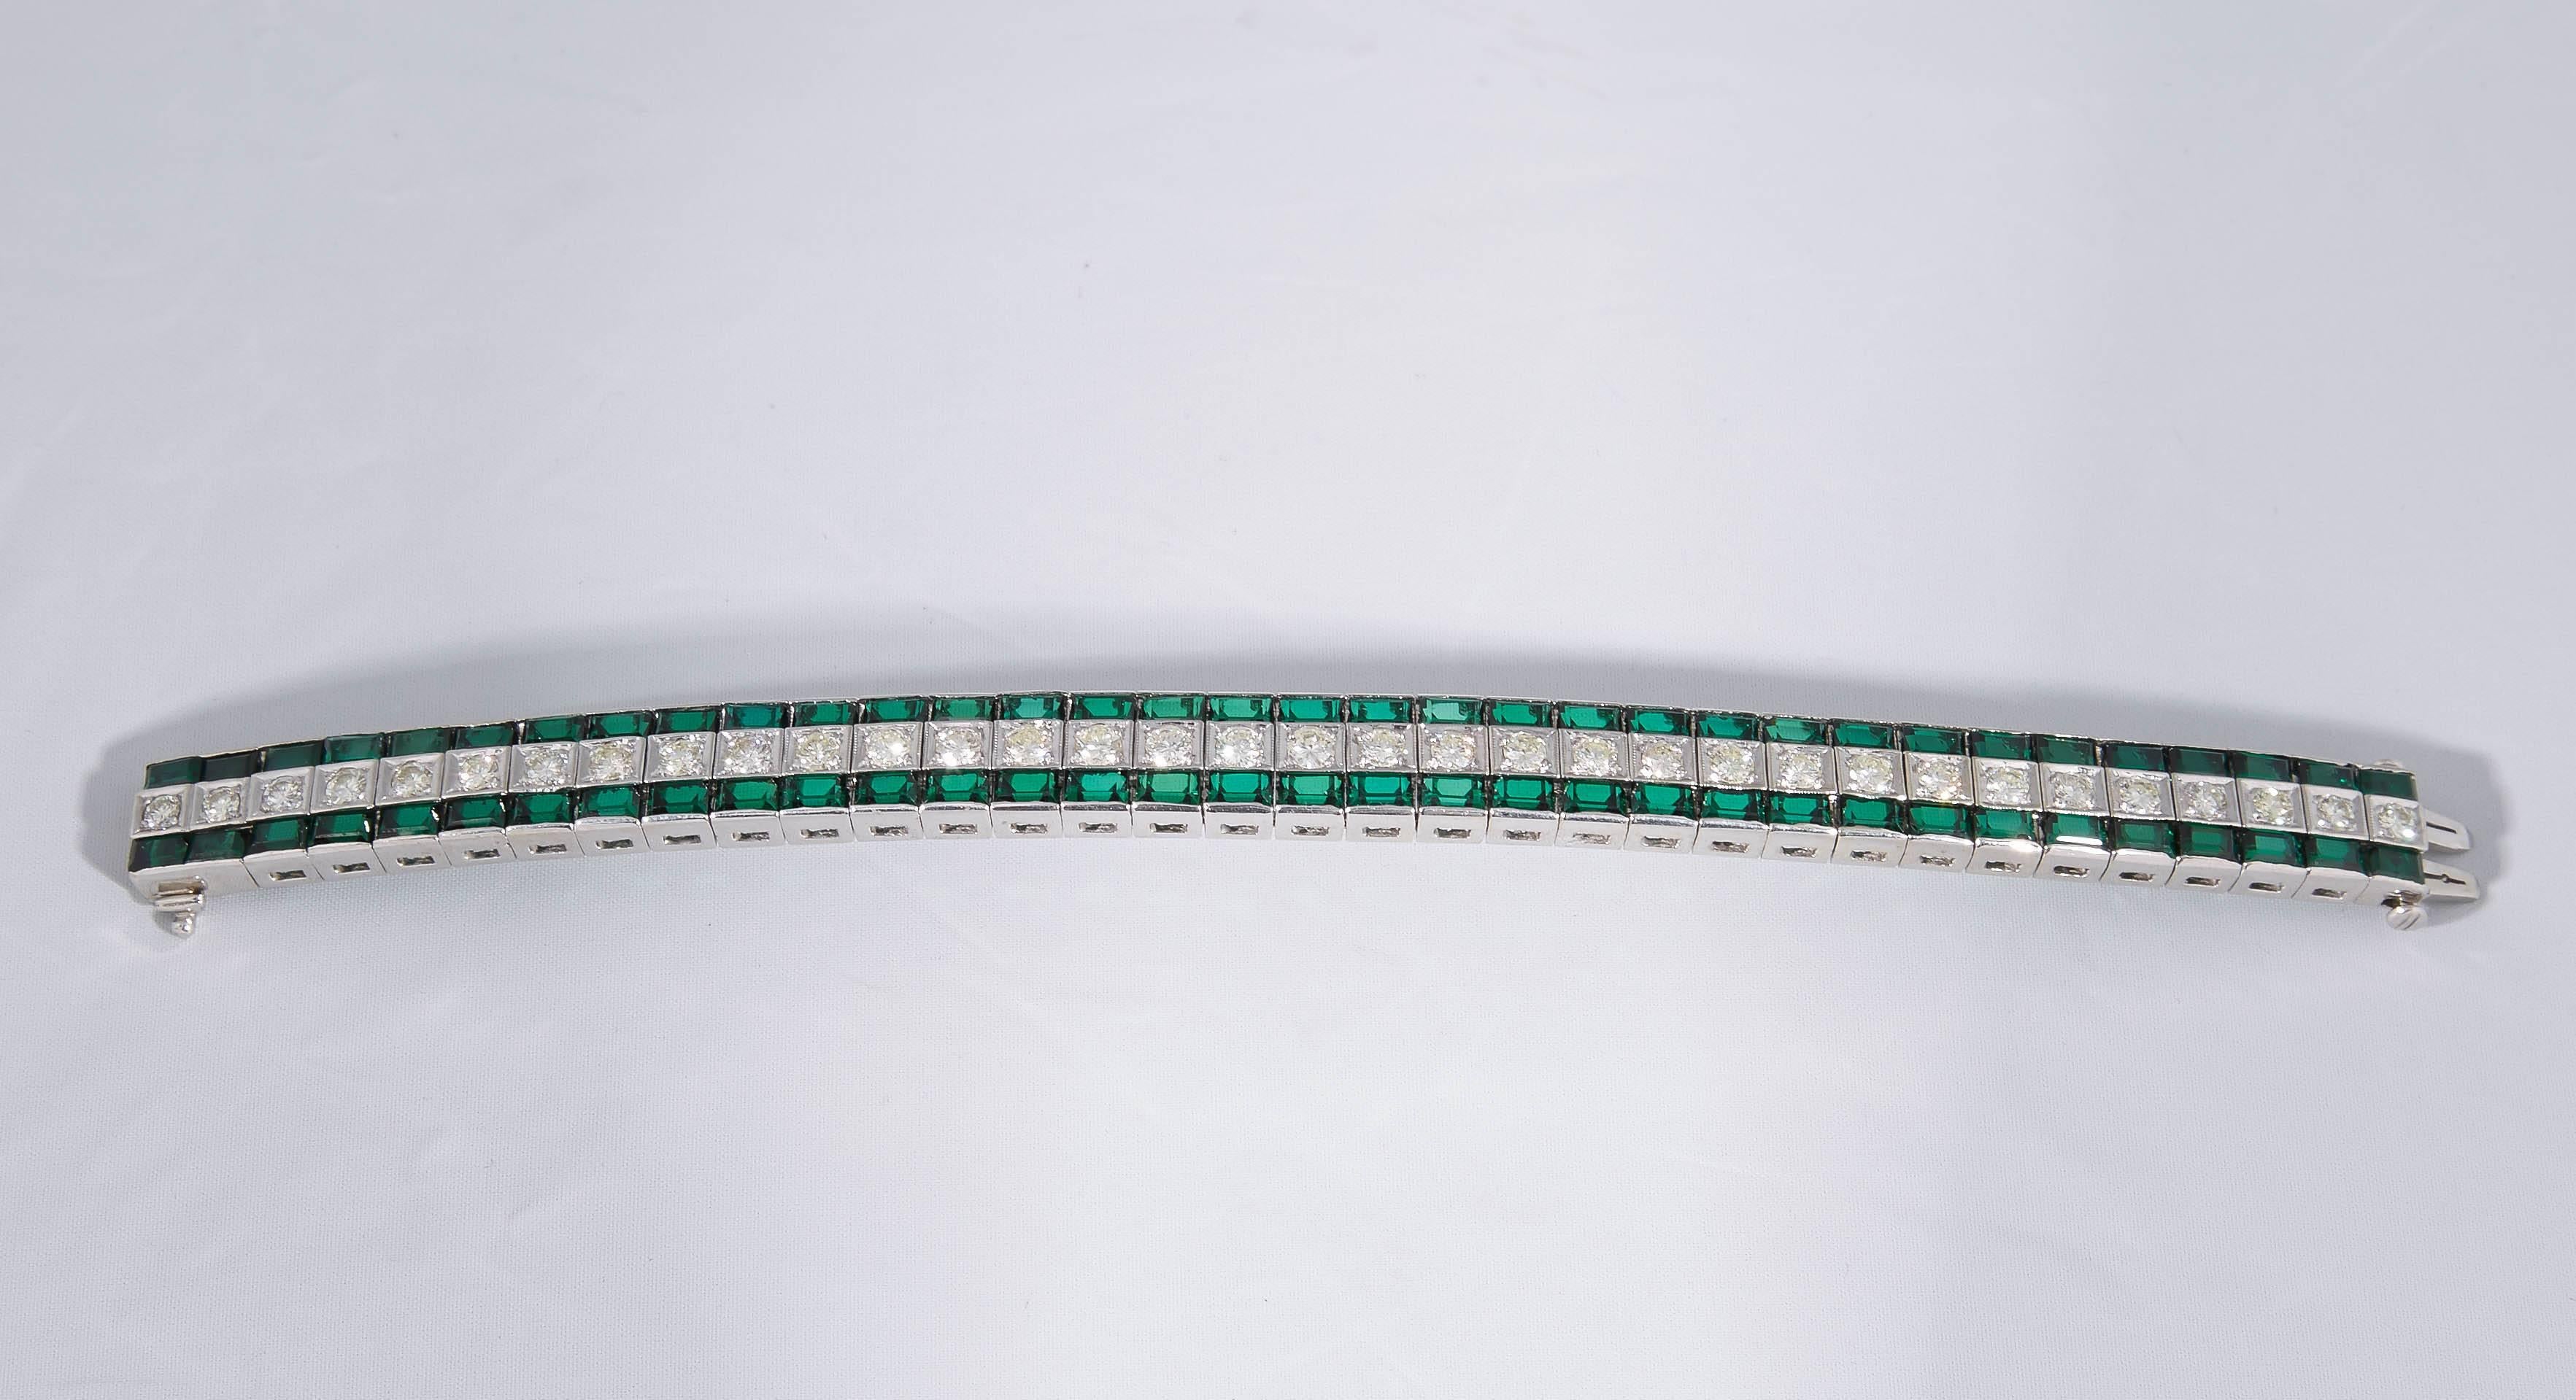 One Ladies Triple Straightline Bracelet Consisting Of Numerous Horizontal Baguette Cut Green Tourmalines Weighing Approximately 10 Carats,Centered By Numerous High quality Full Cut Diamonds Weighing Approximately 4 Carats Total Weight. Triple